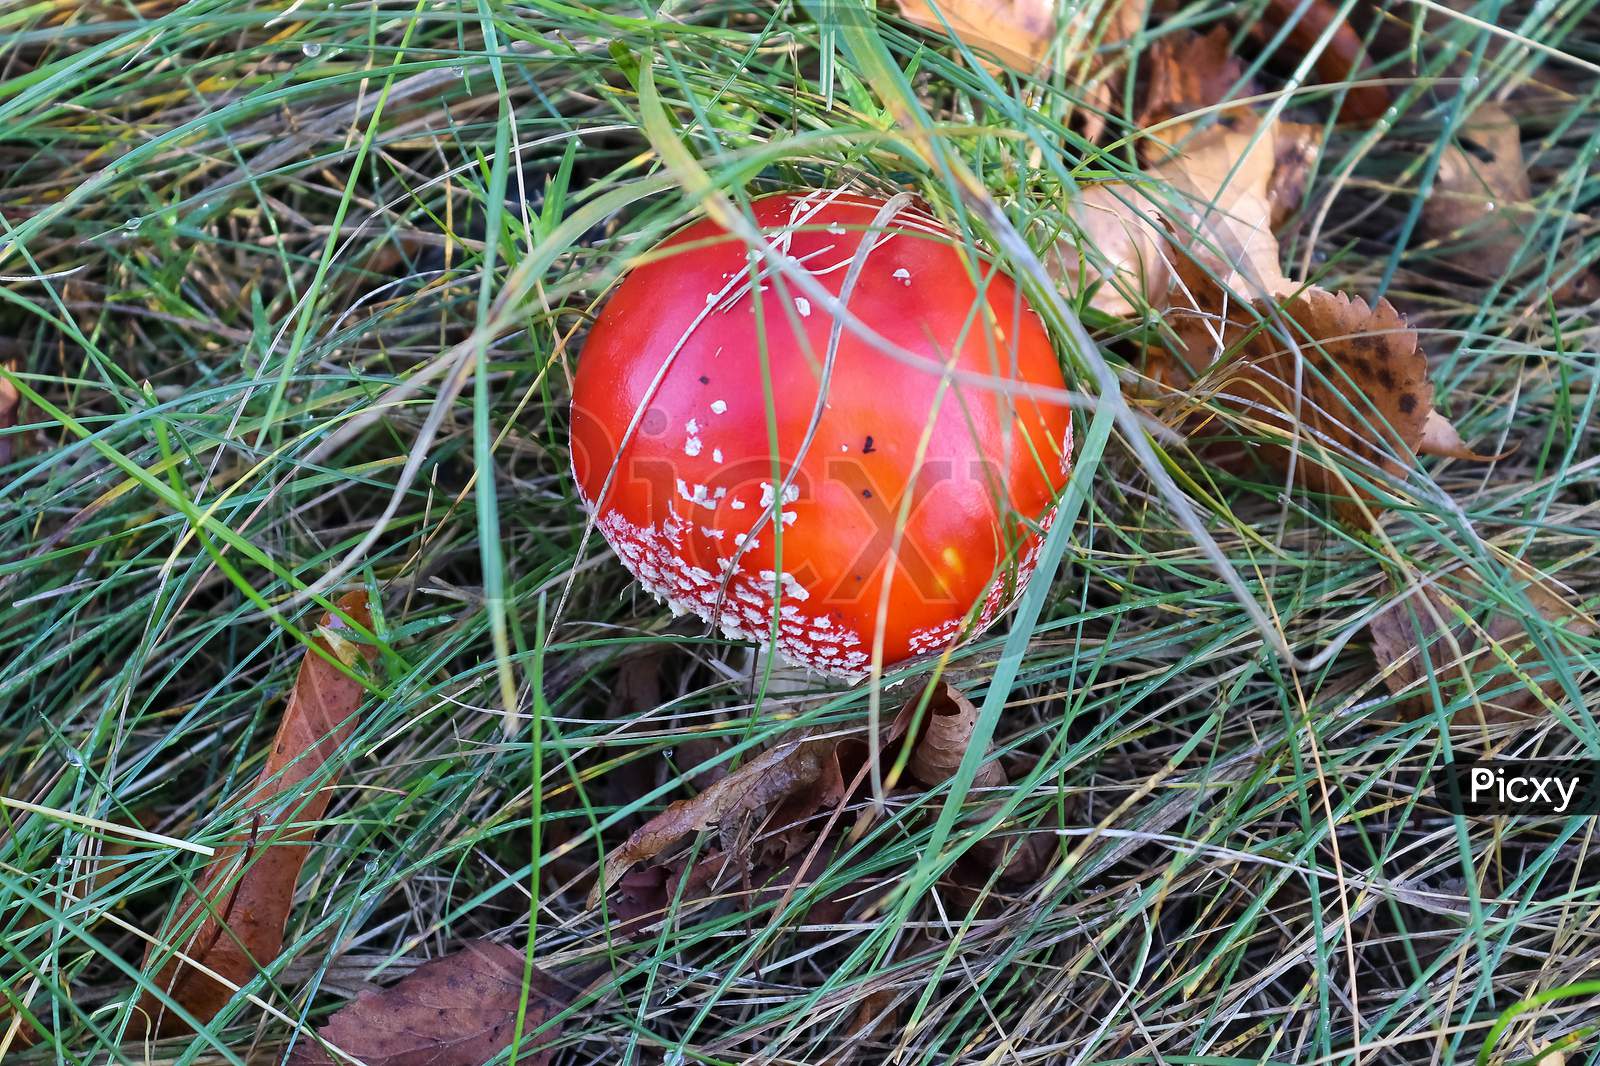 Red Poisonous Mushroom Amanita Muscaria Known As The Fly Agaric Or Fly Amanita In Green Grass.